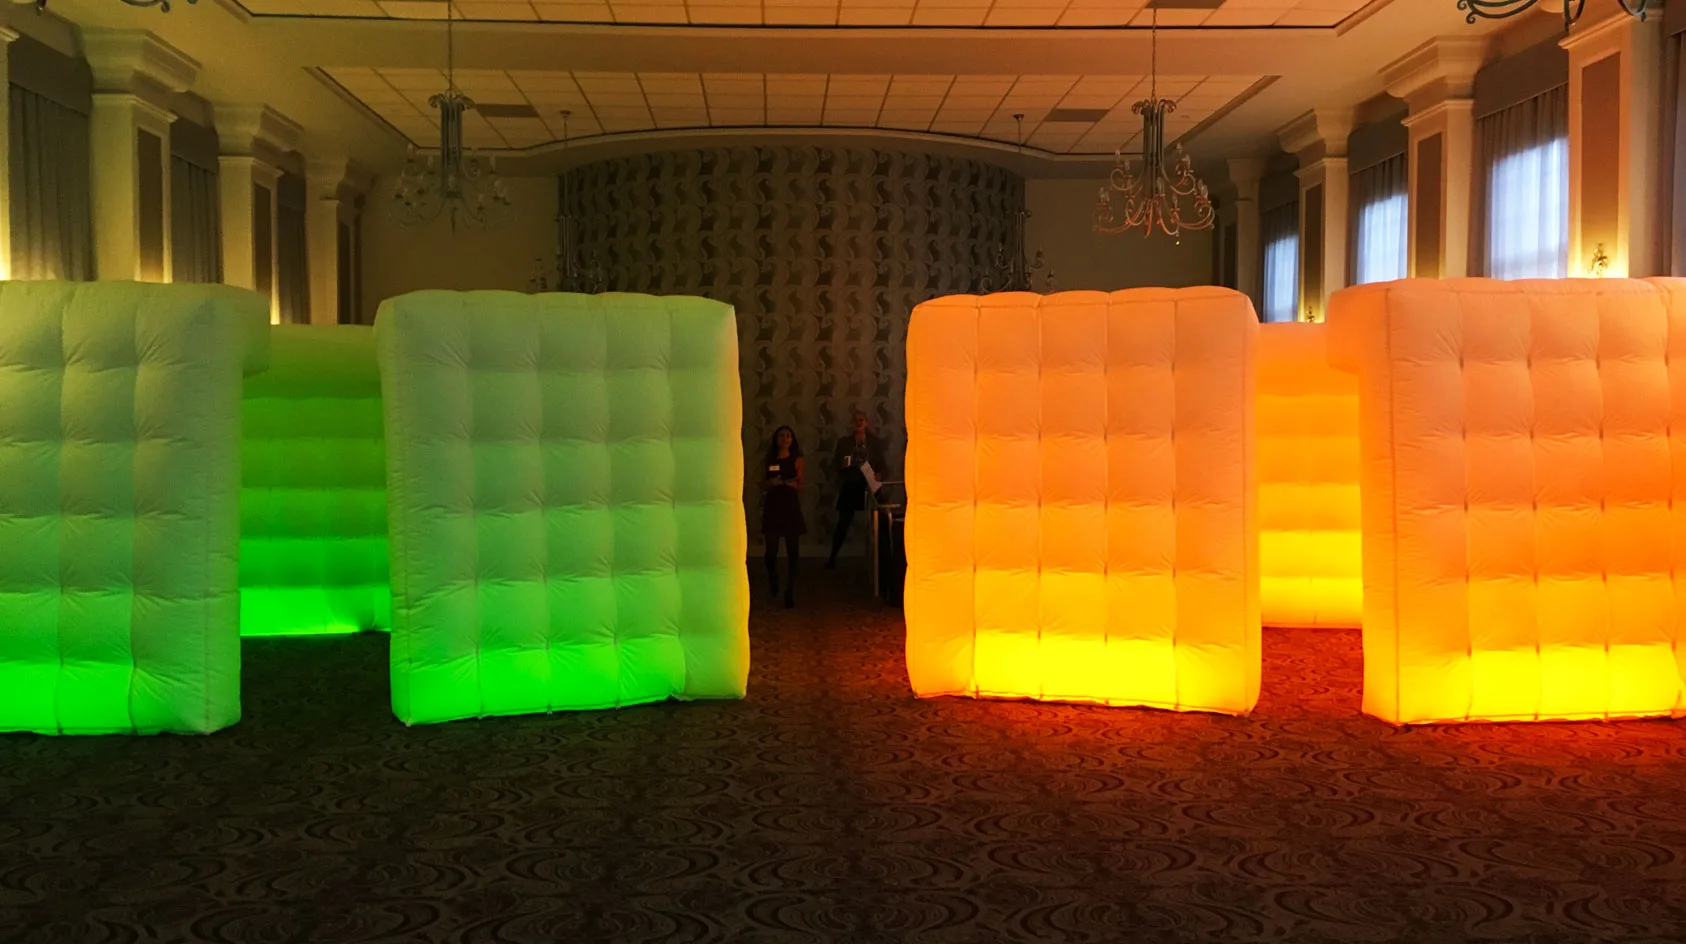 Pic showing a pair of Created By Air Boxer modular inflatable structures setup at the entrance to an indoor event